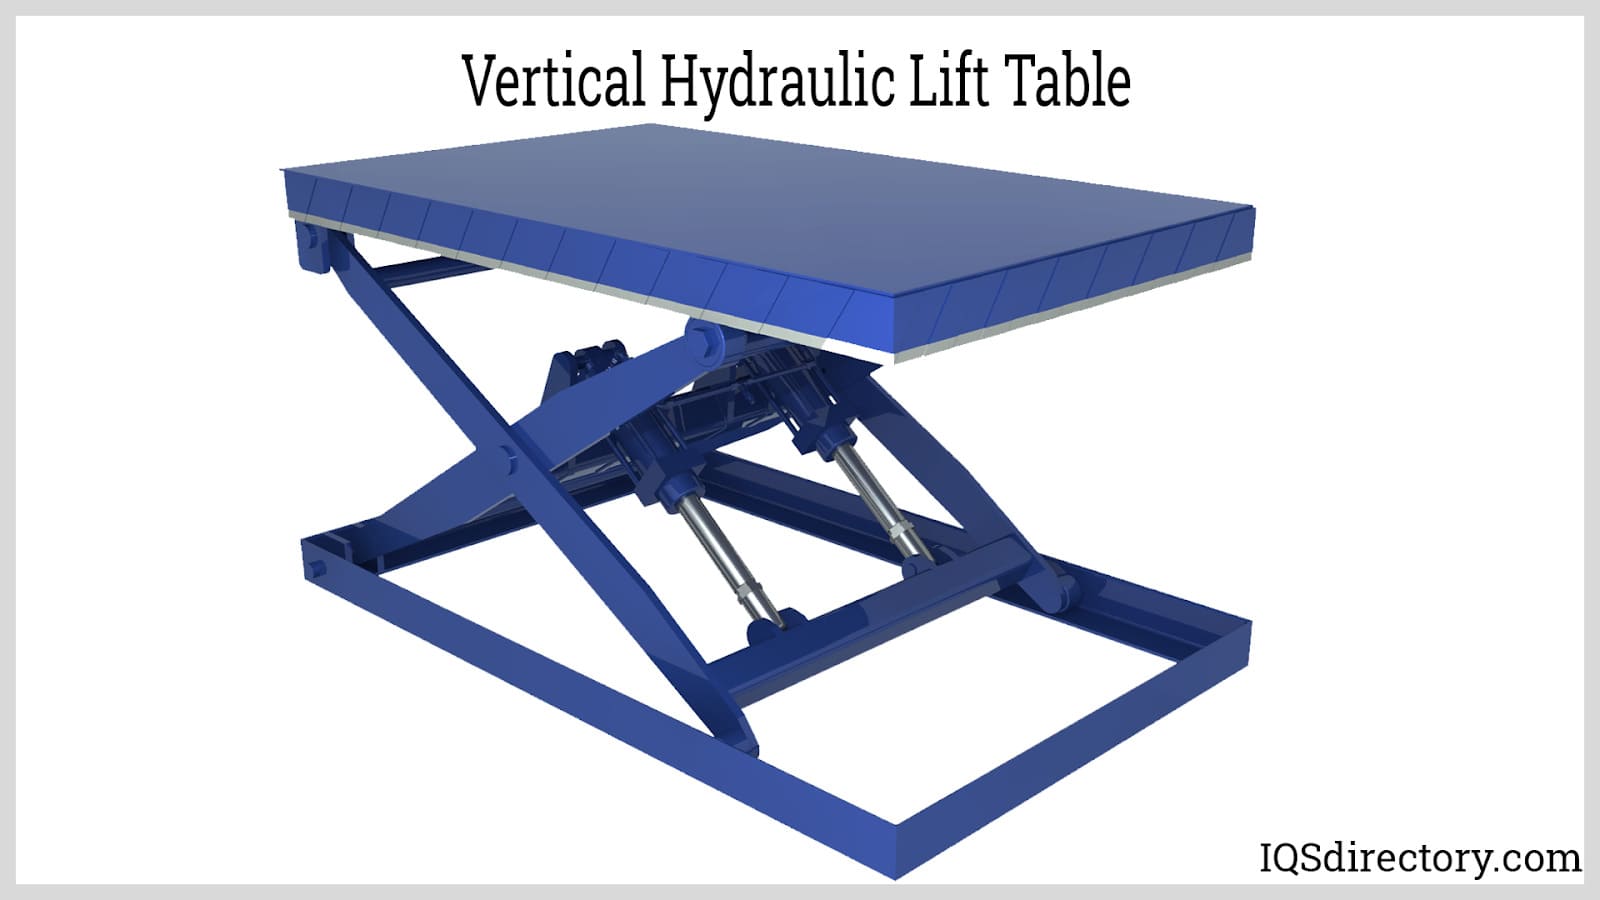 Vertical Hydraulic Lift Table